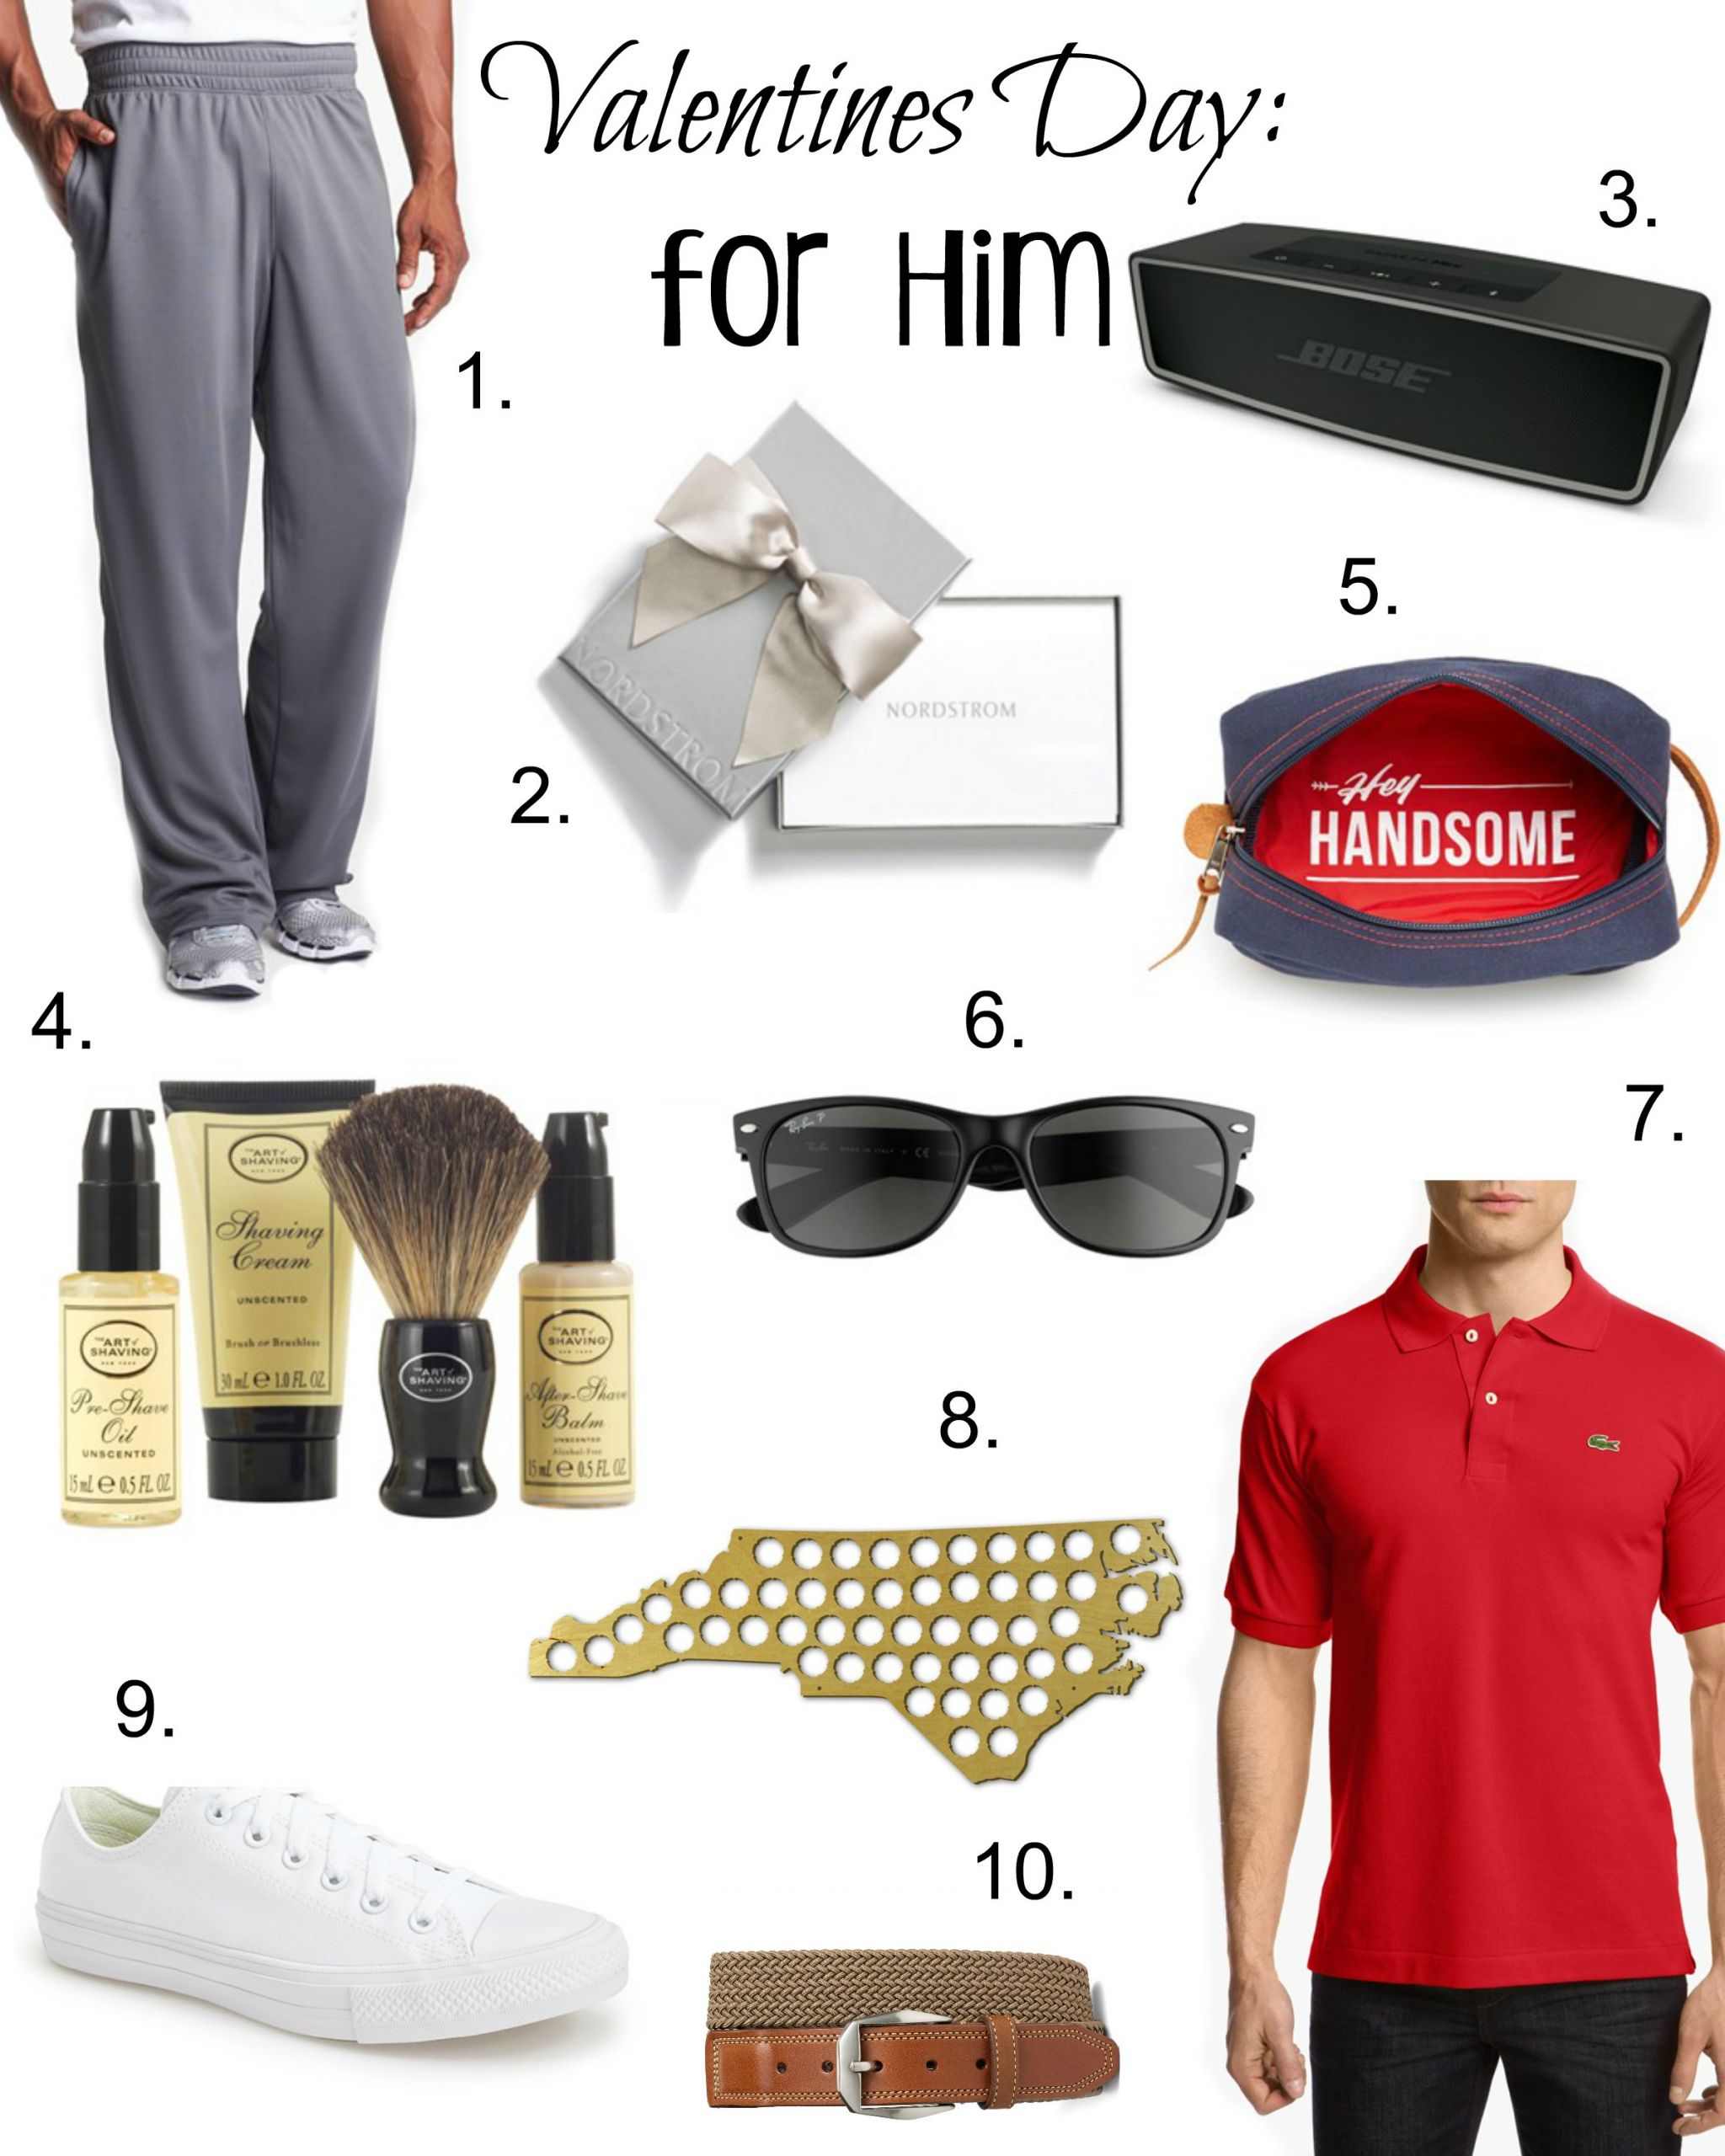 Top Valentines Day Gifts
 Top 10 Valentines Day Gifts For Him